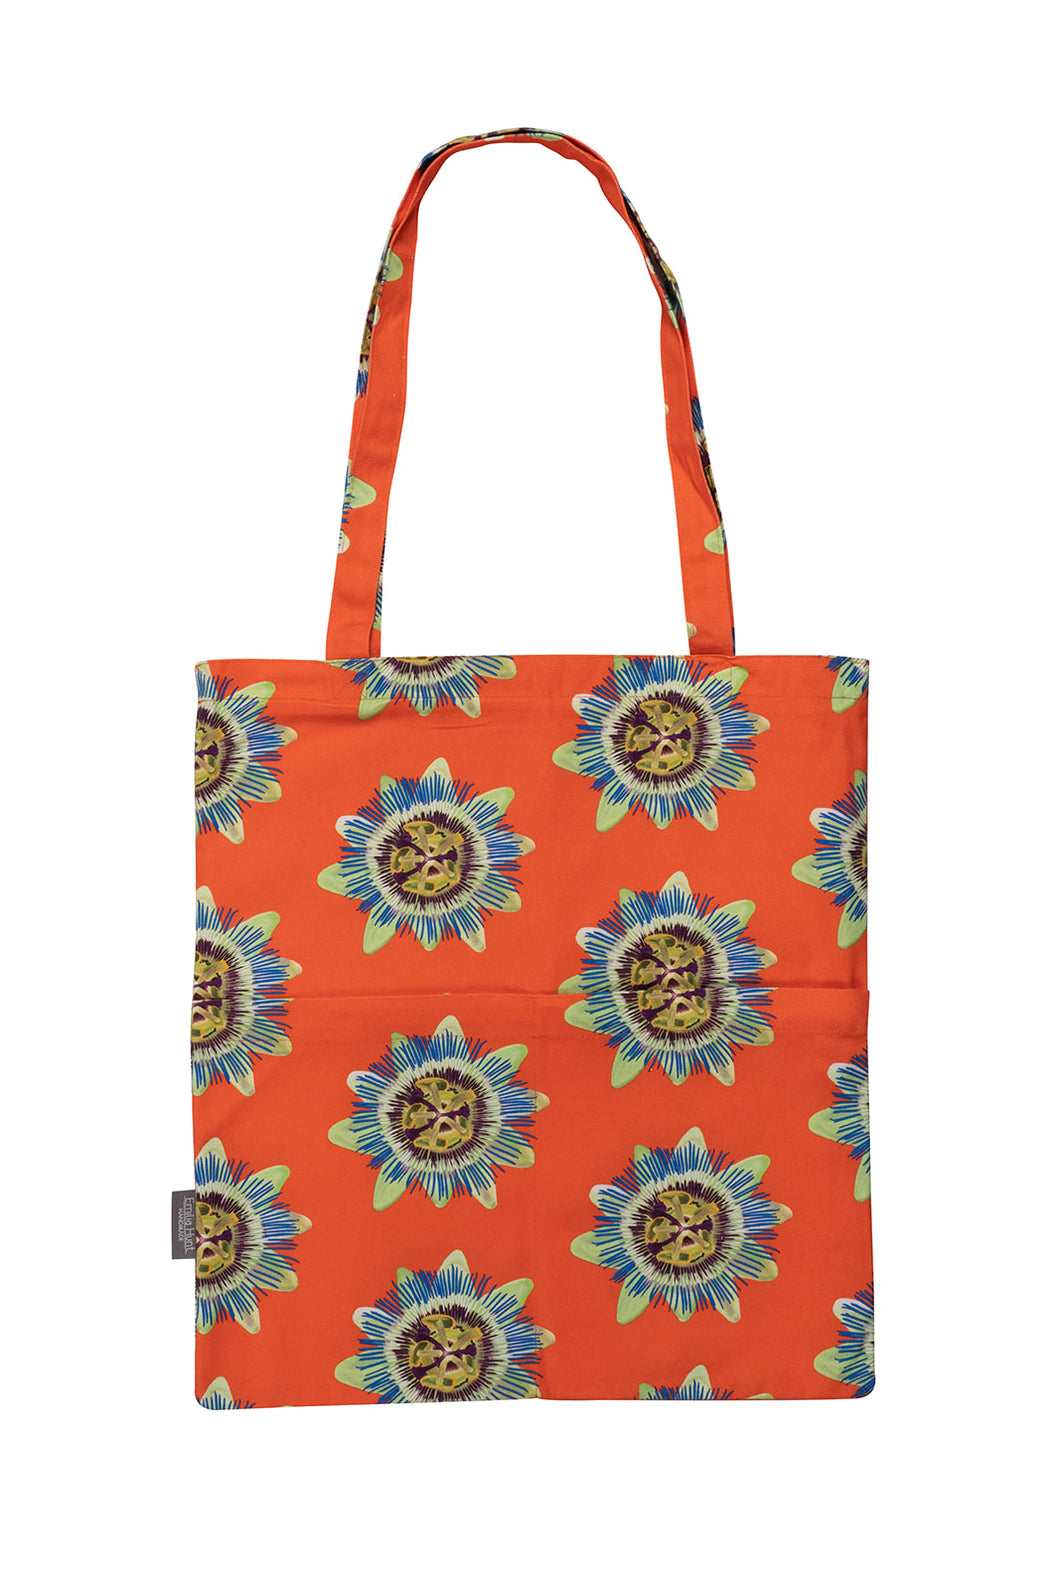 Coral Passion Flower Tote Bag